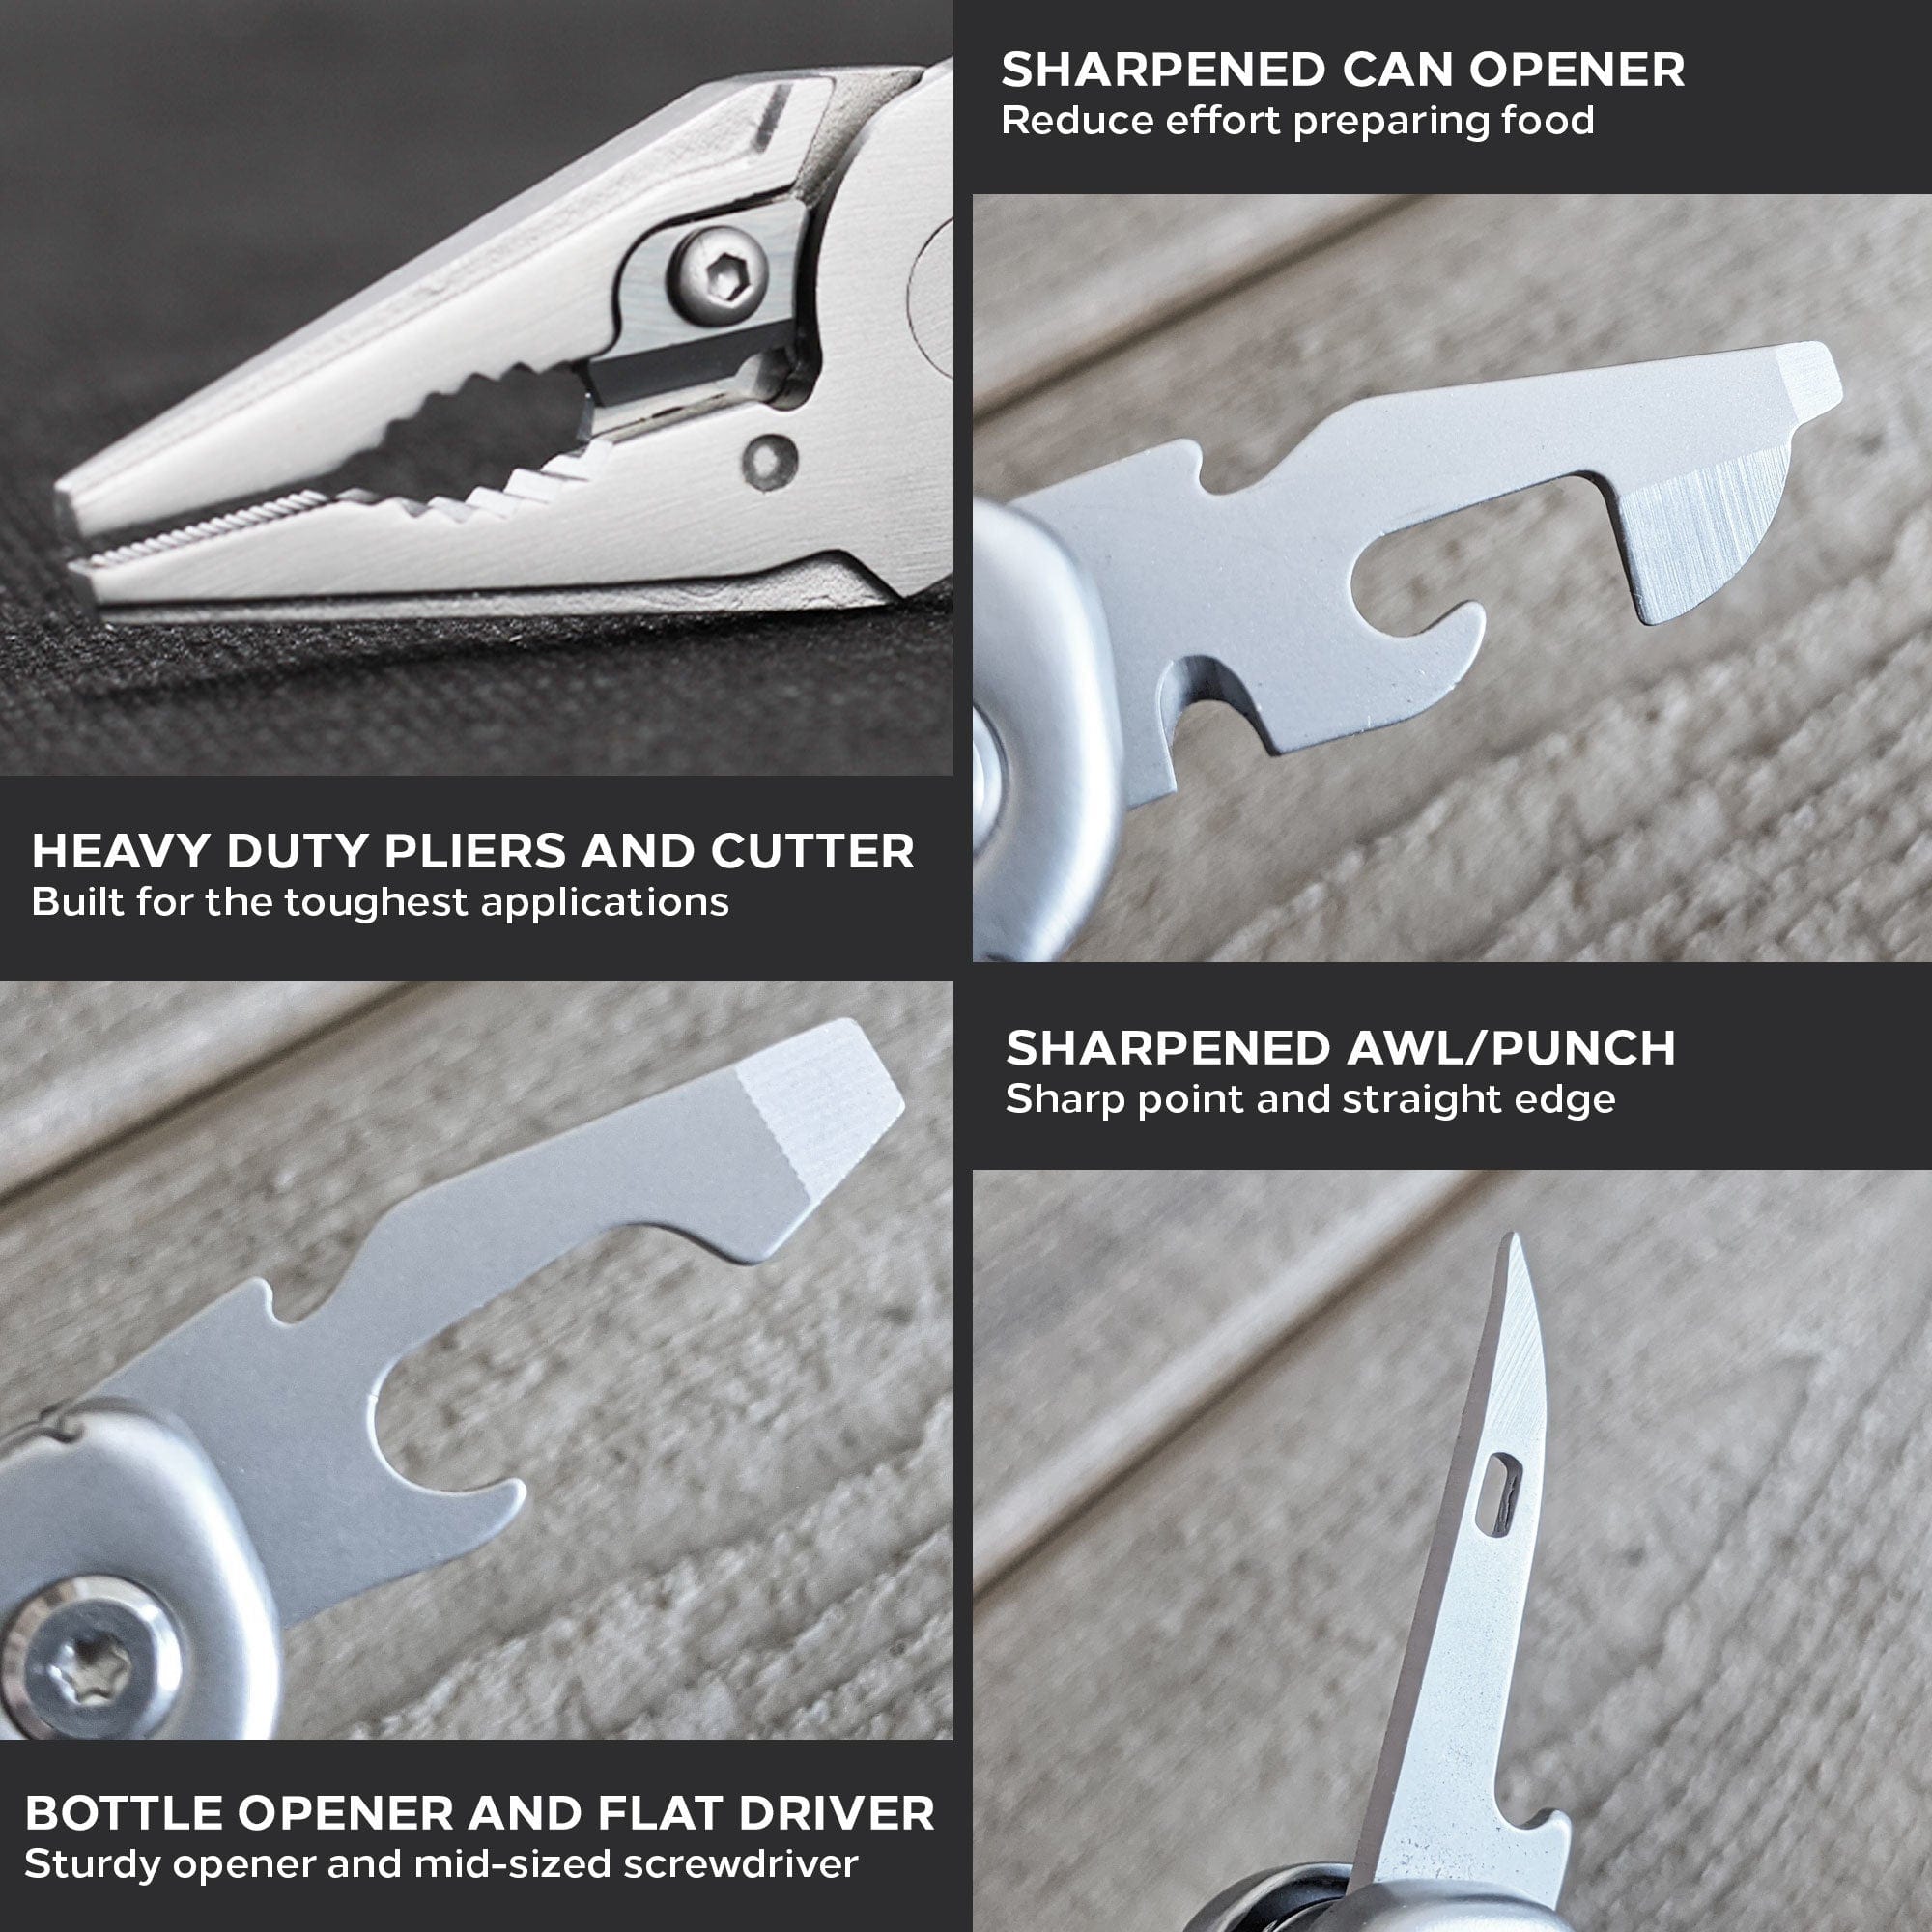 The Perfect Heavy Duty Multitool for Emergencies, Outdoors, Survival, Camping, Hiking - Military Grade Stainless Steel -  ACTION™ Multitool